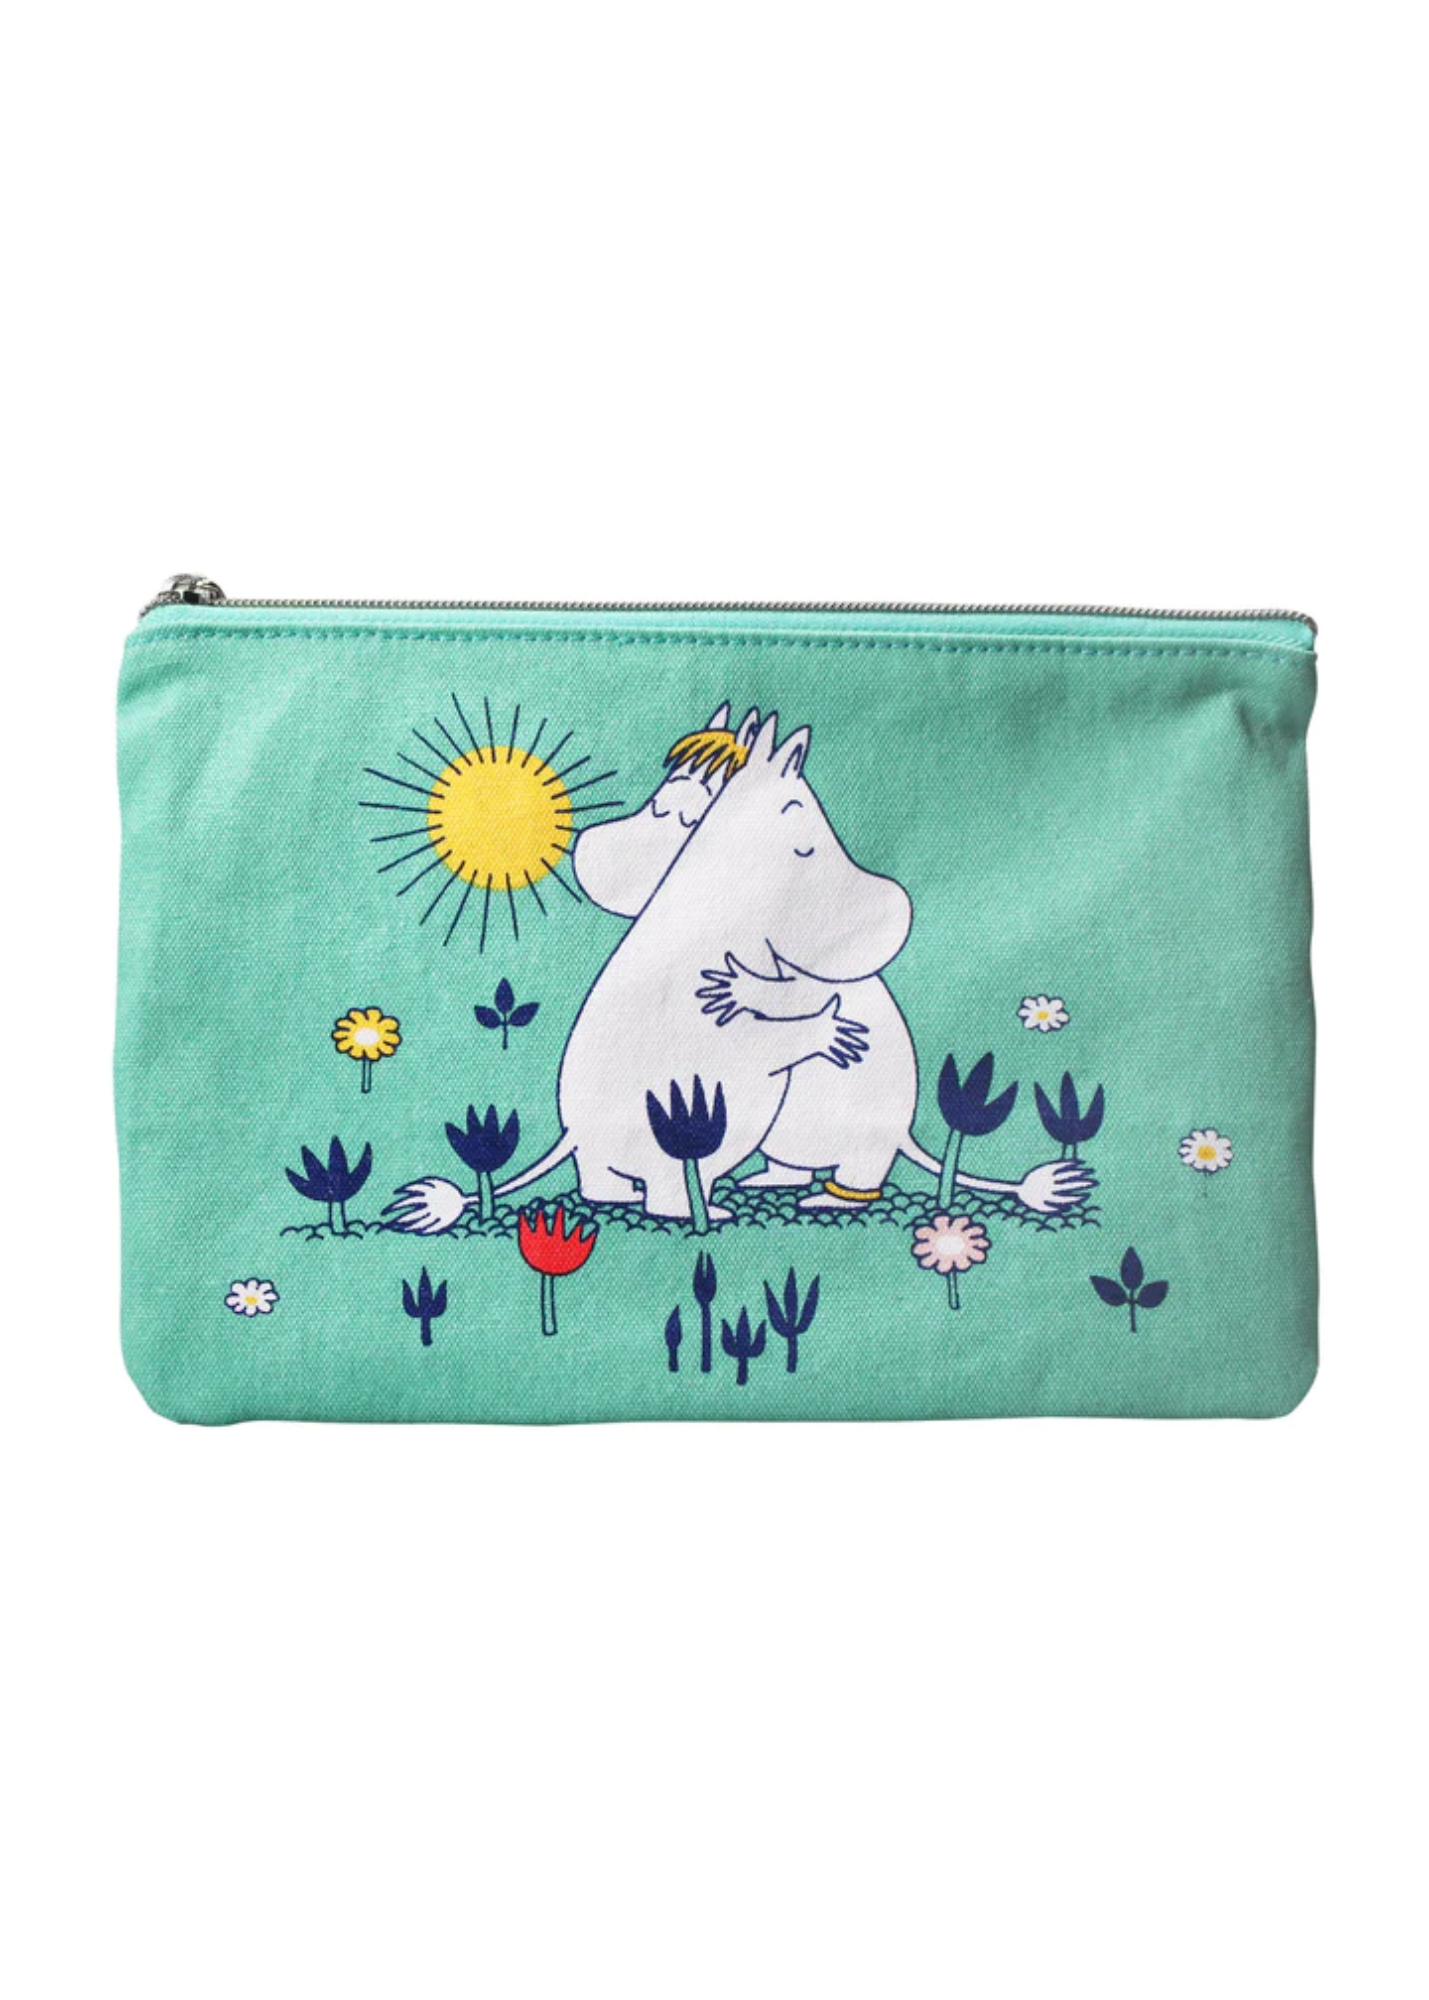 Half Moon Bay - Moomin Large Recyled Cotton Hug Pouch